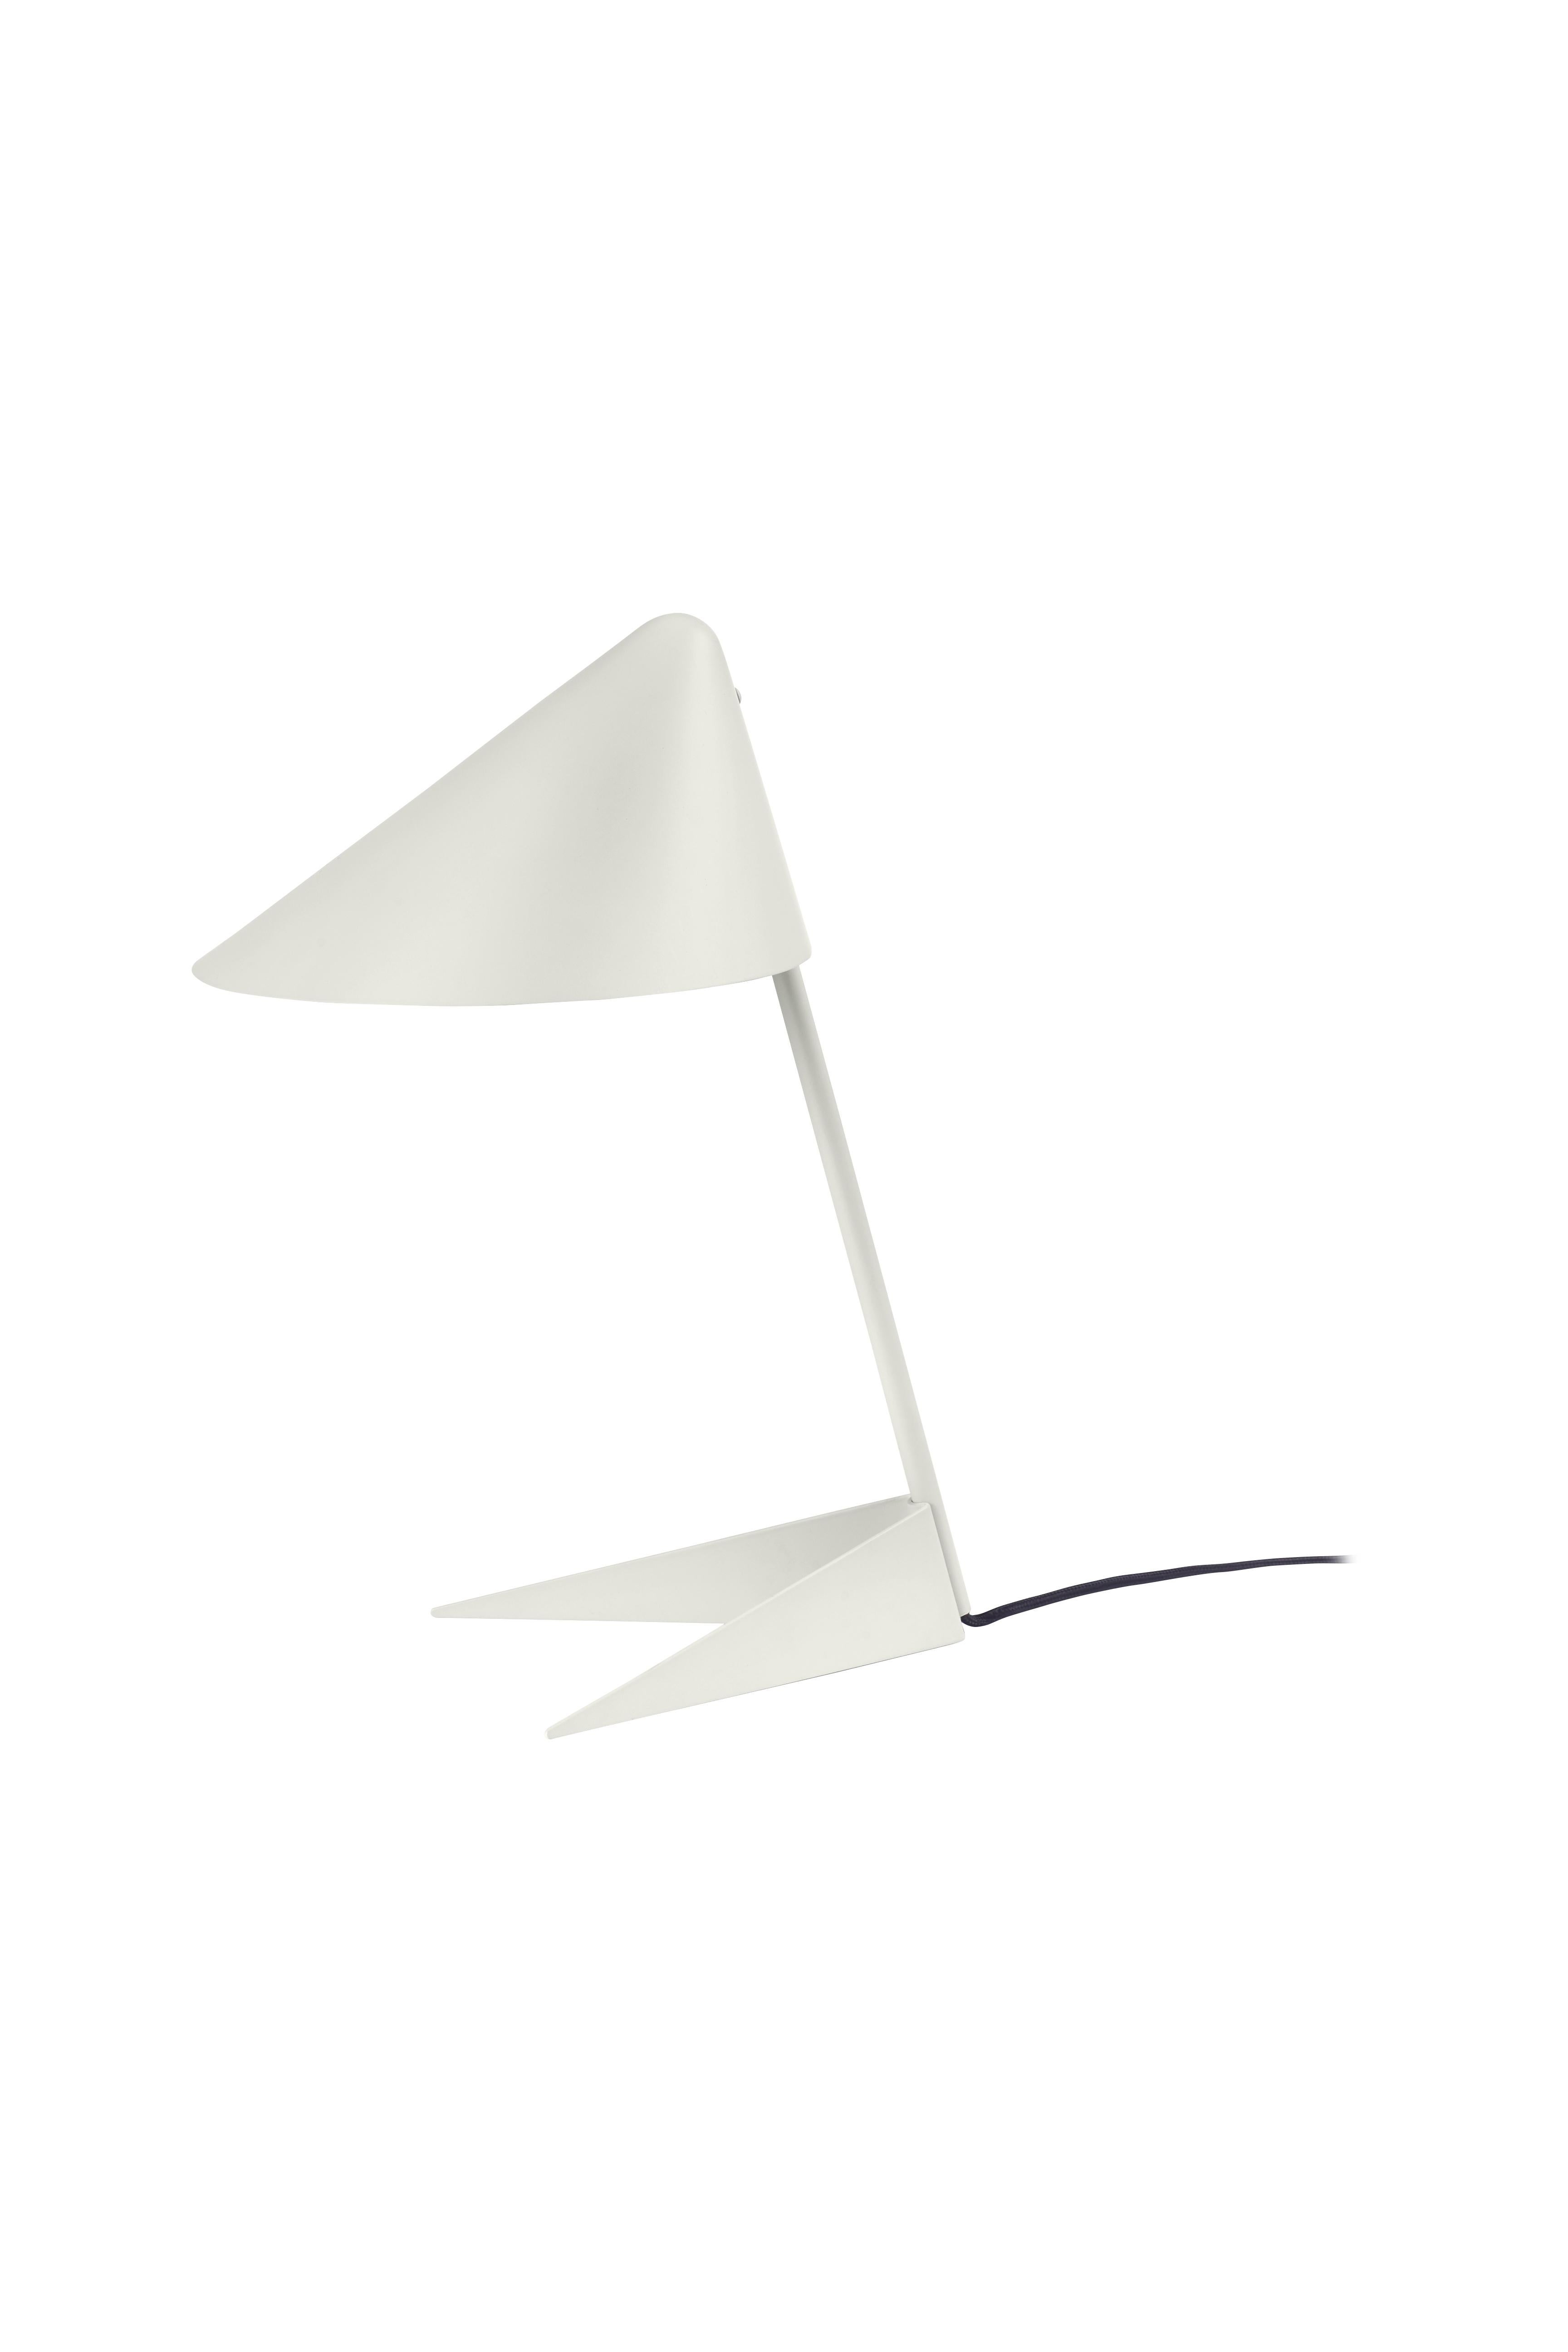 For Sale: White (Warm White) Ambience Table Lamp, by Svend Aage Holm Sorensen from Warm Nordic